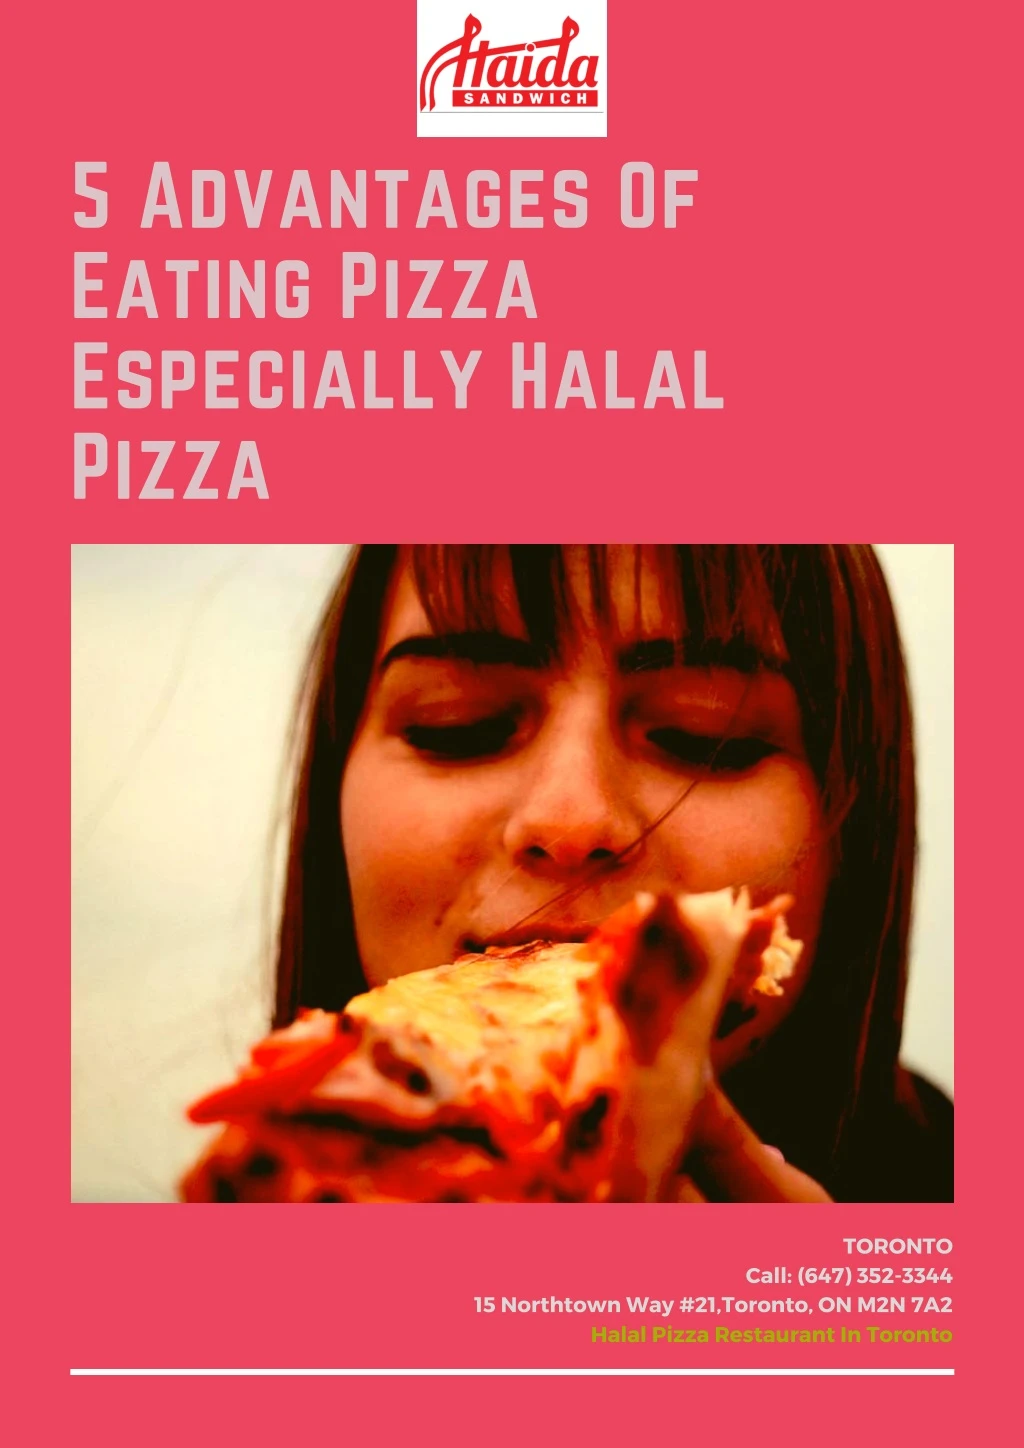 5 advantages of eating pizza especially halal